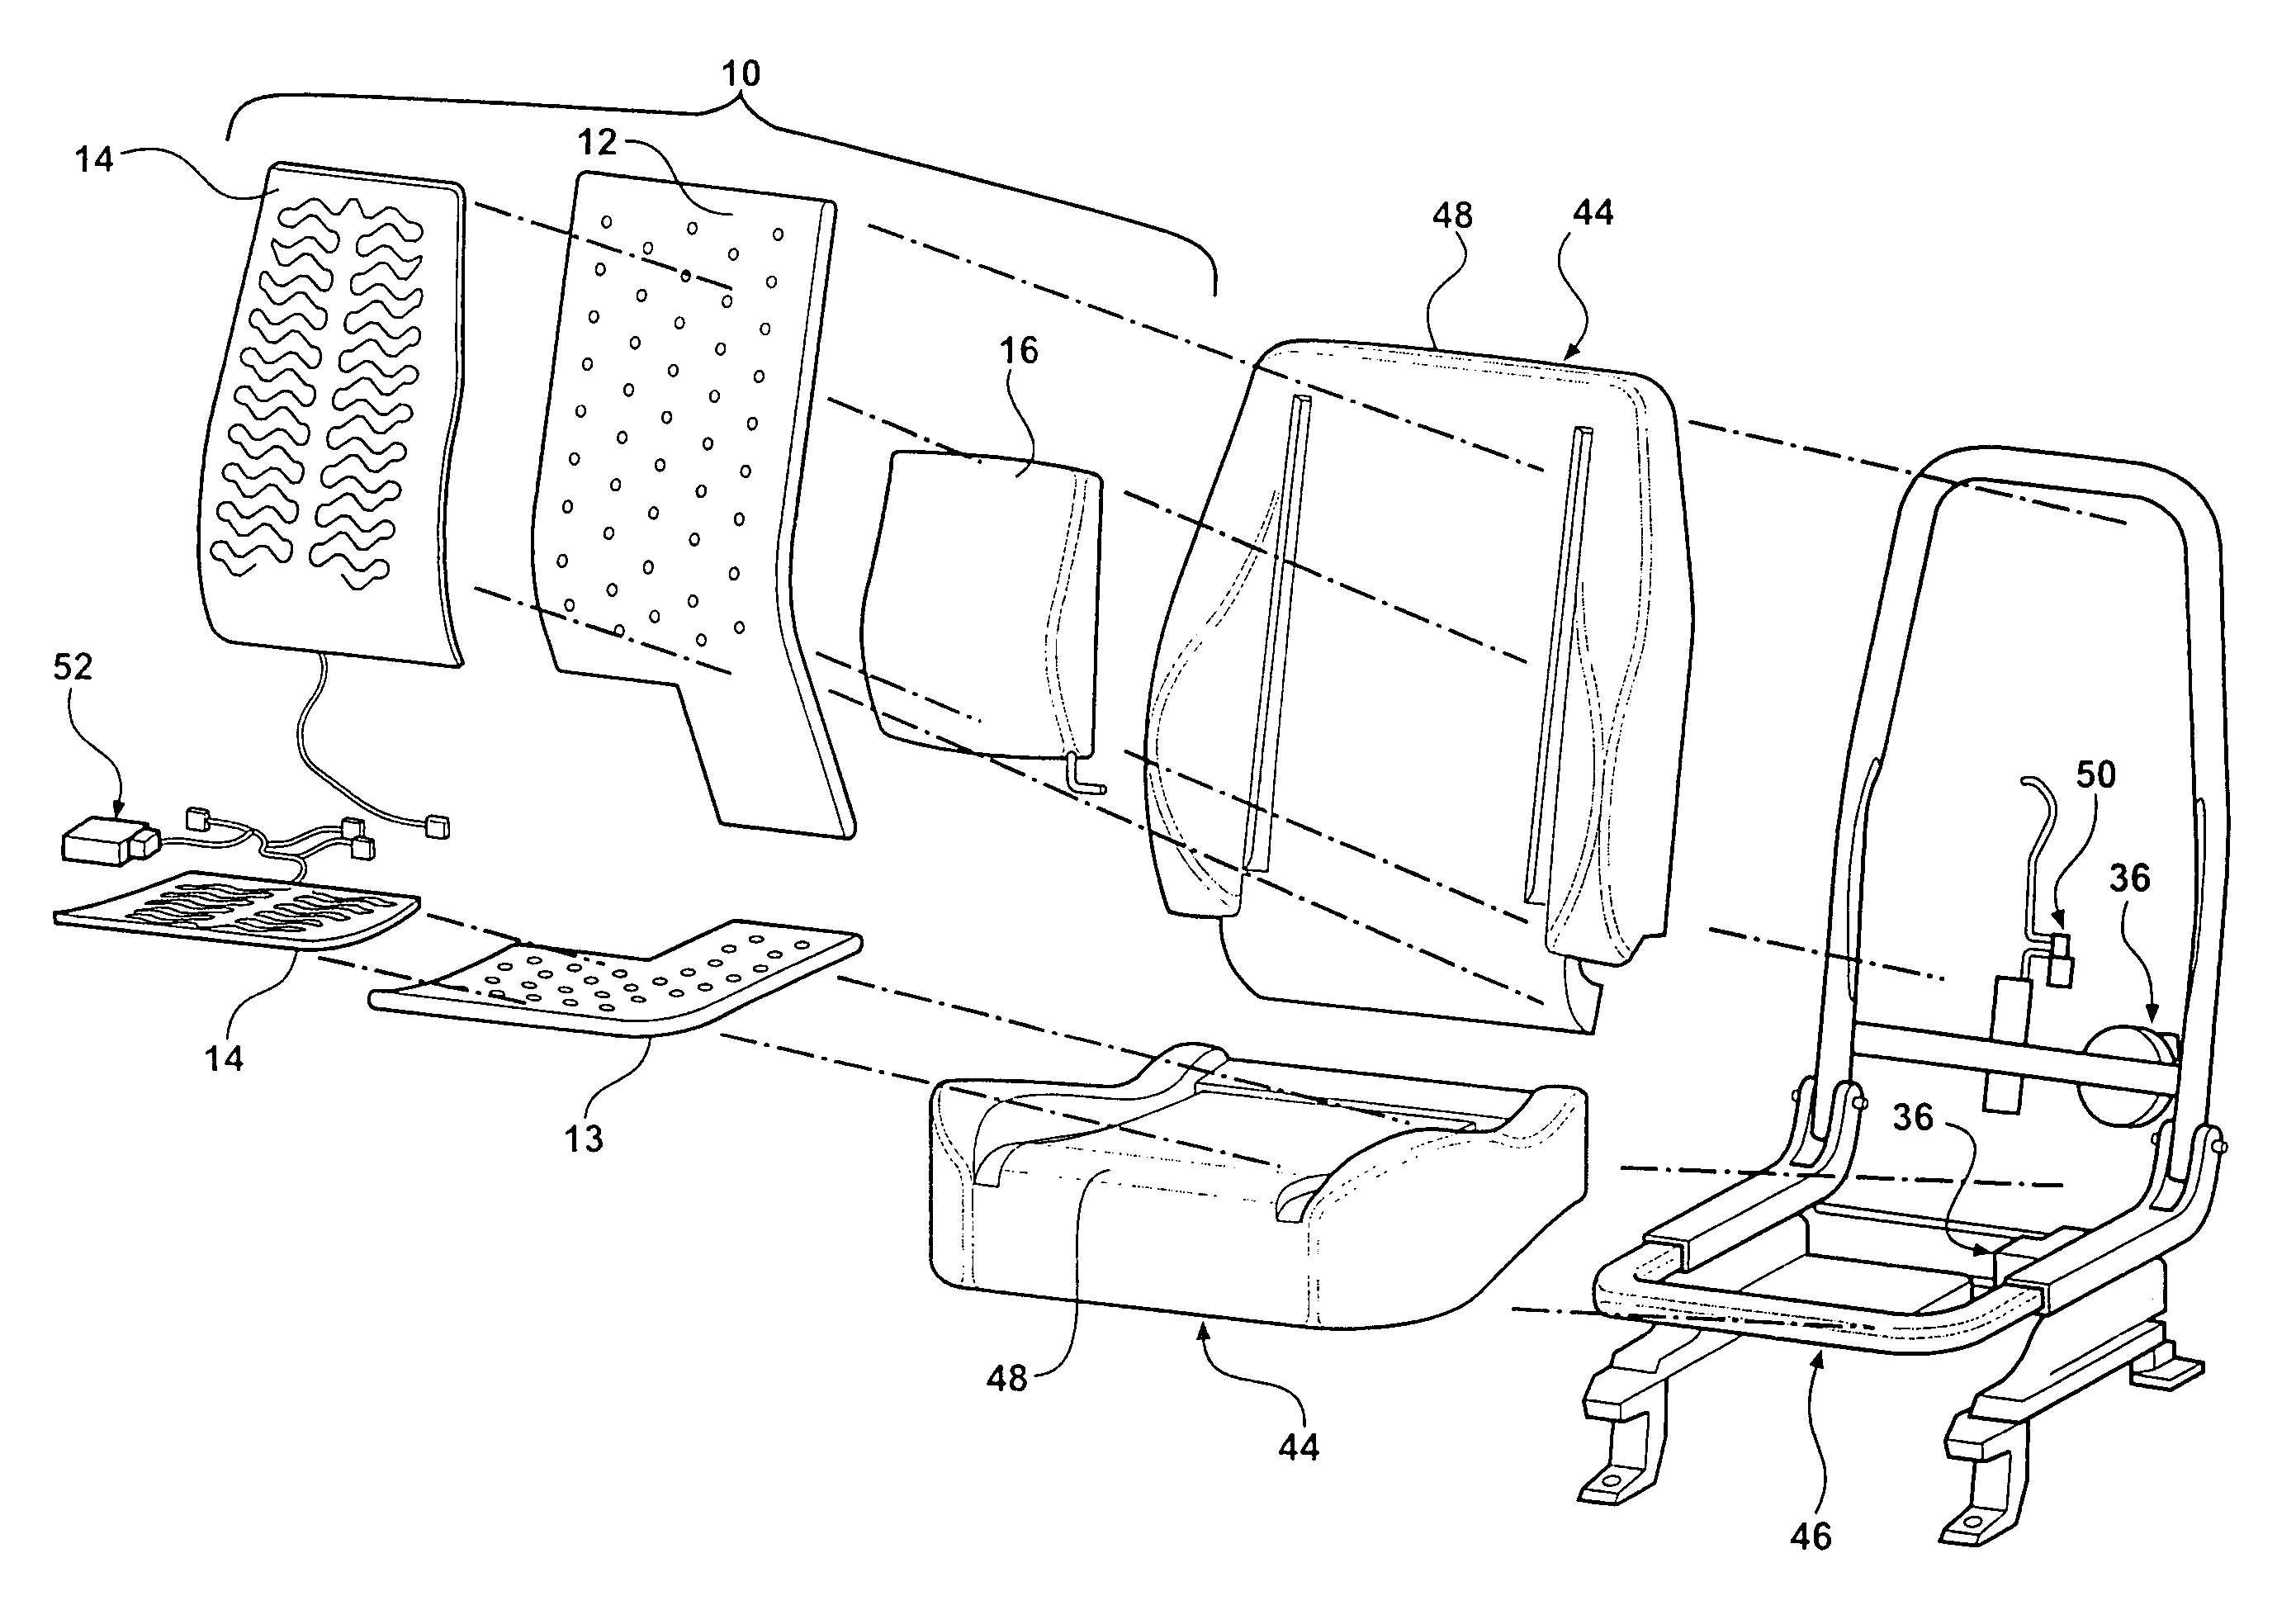 Modular comfort assembly for occupant support